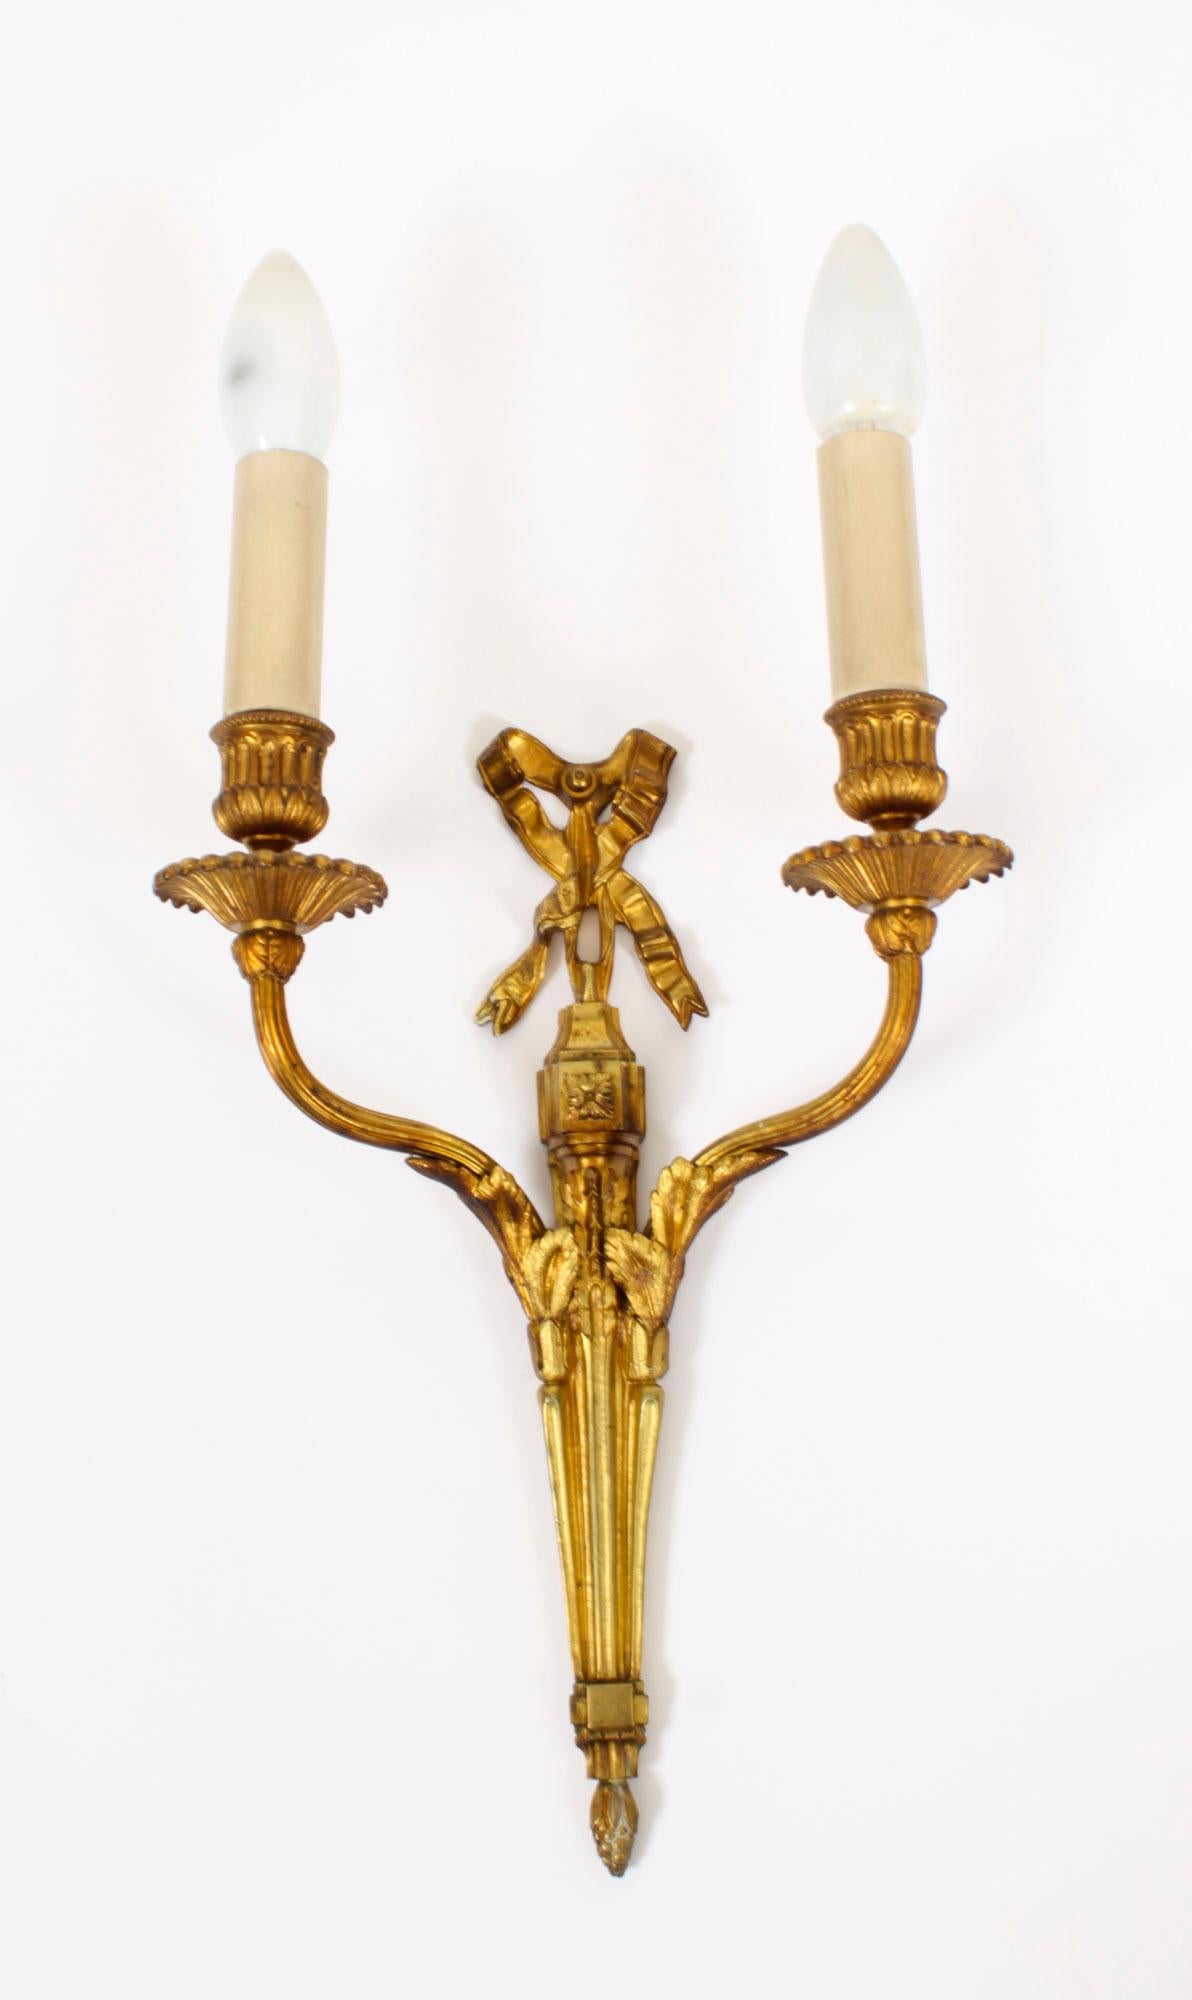 This is a fine pair of antique Regency Revival twin branch ormolu wall candle lights dating from Circa 1920.

The wall lights feature ribbon bow tops above tapering bodies with decorative mounts, each with acanthus leaf cast shaped branch arms with